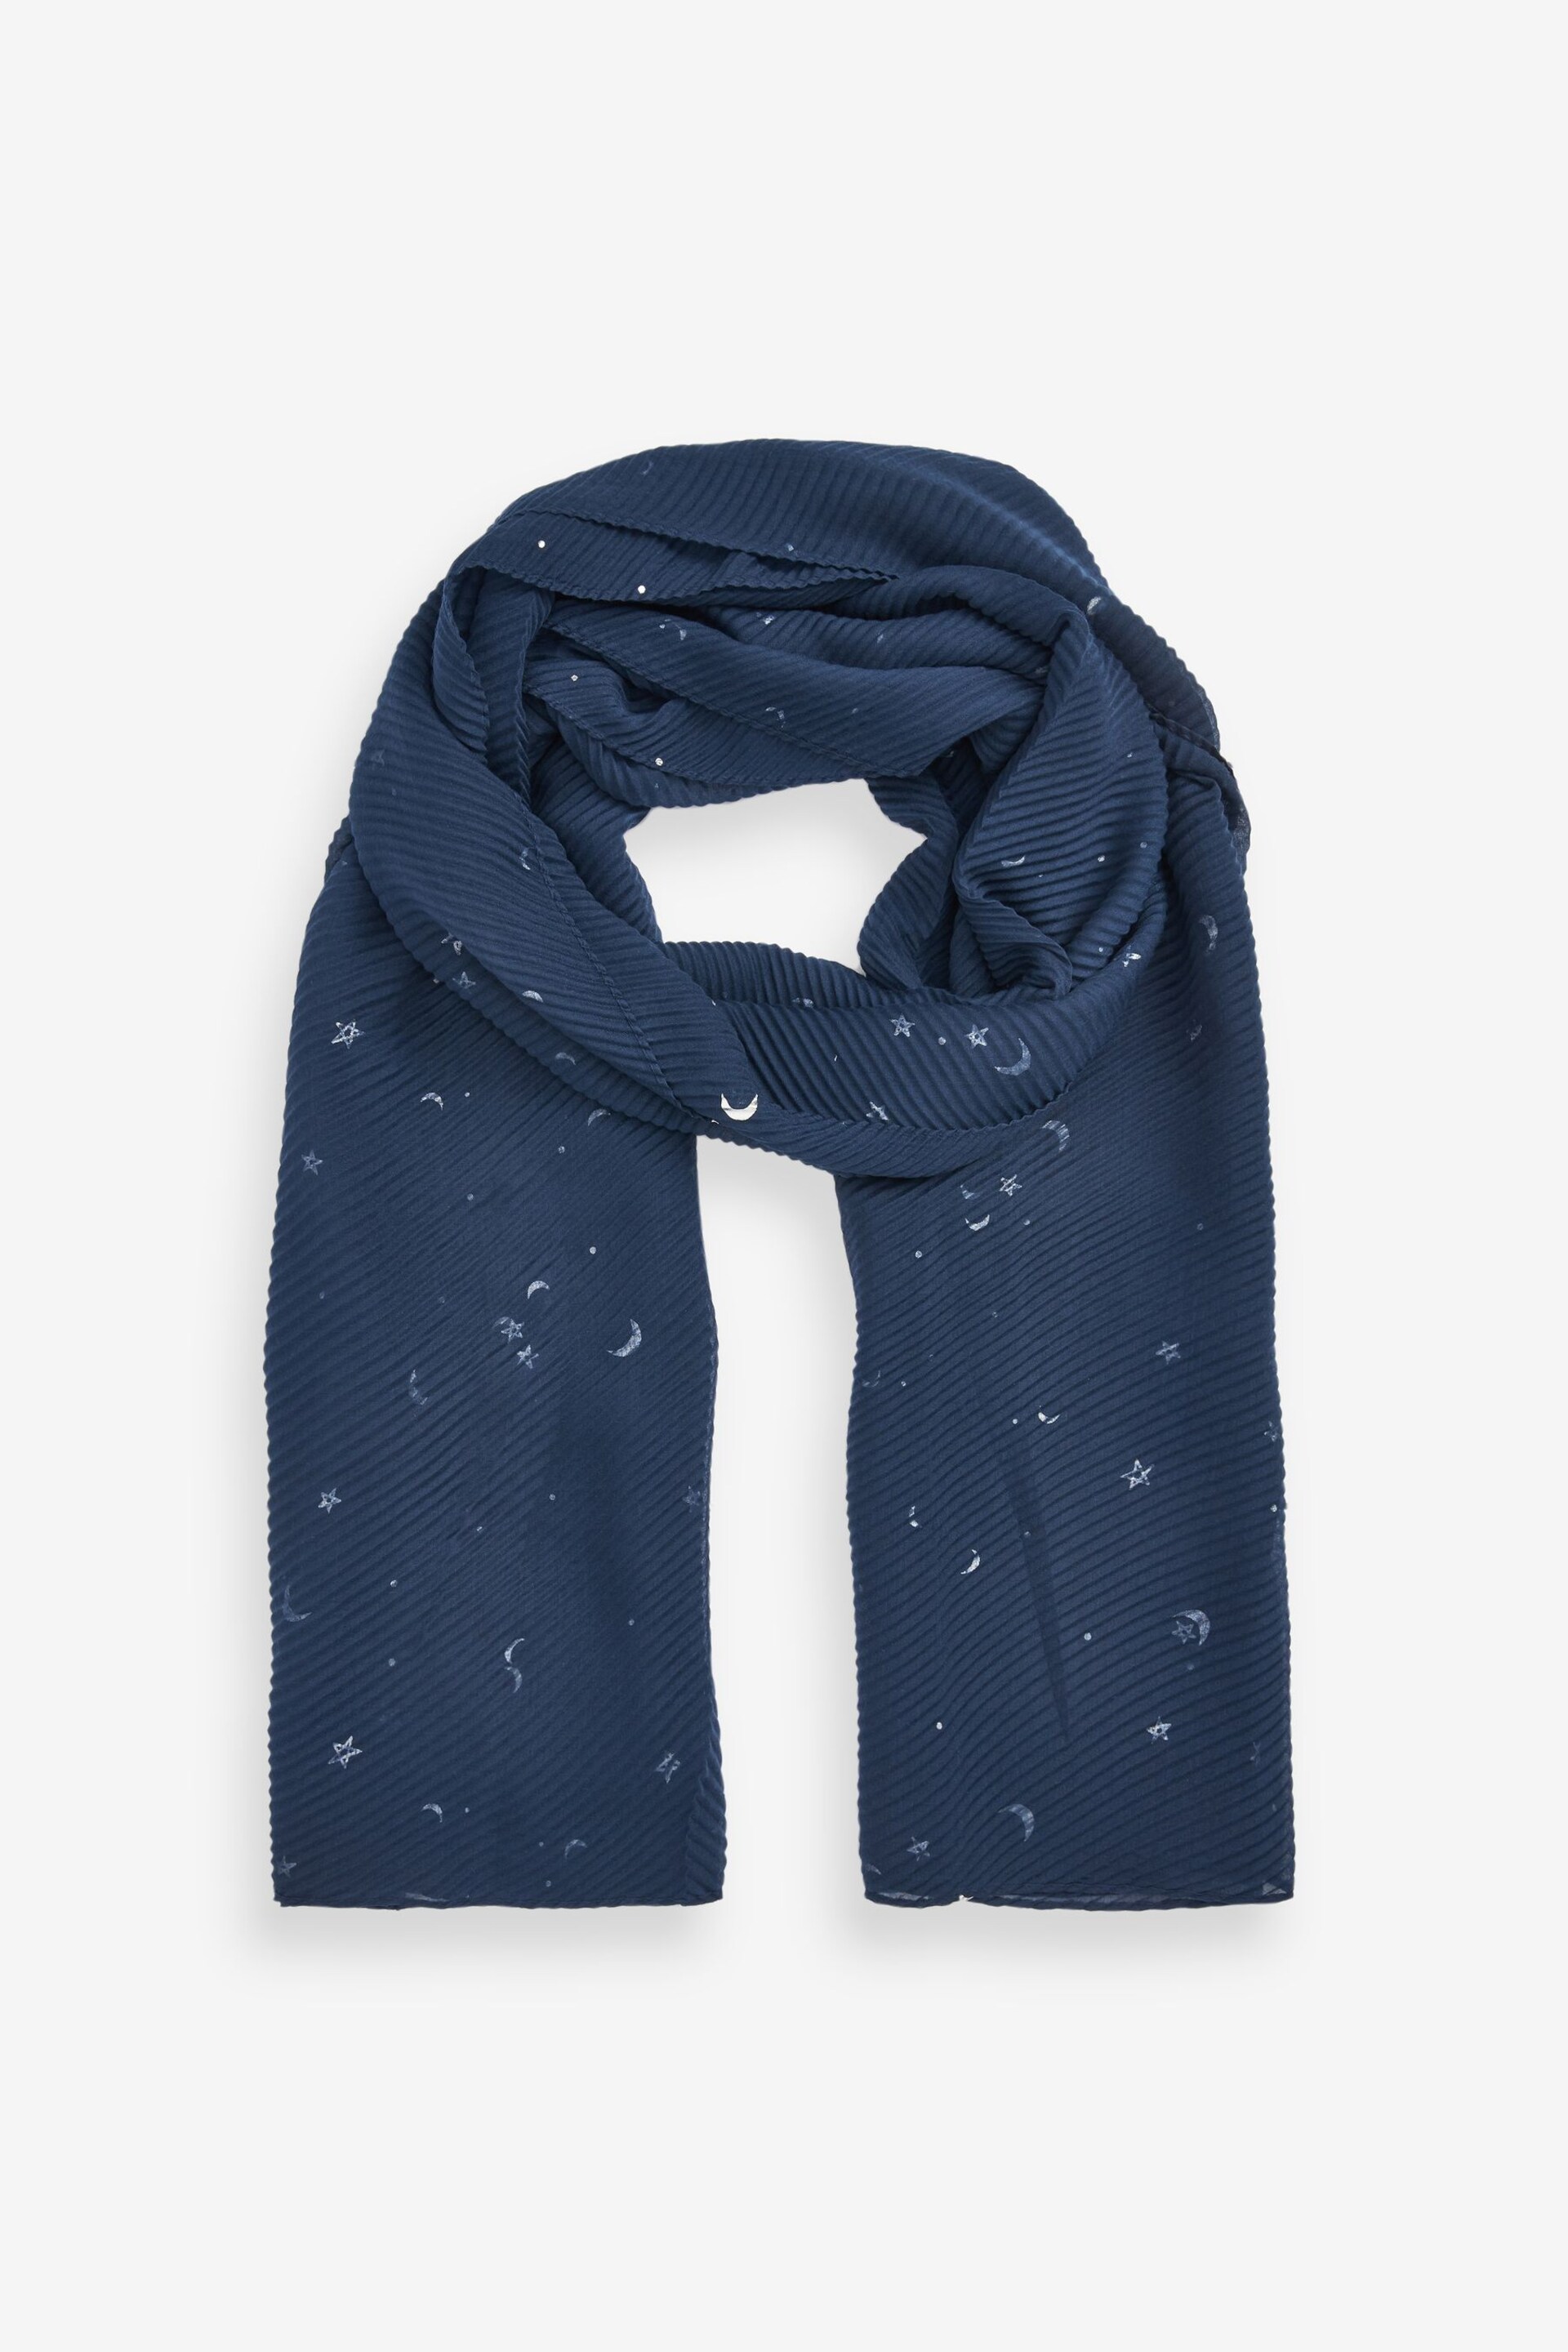 Navy Foil Moon and Star Plisse Midweight Scarf - Image 4 of 6